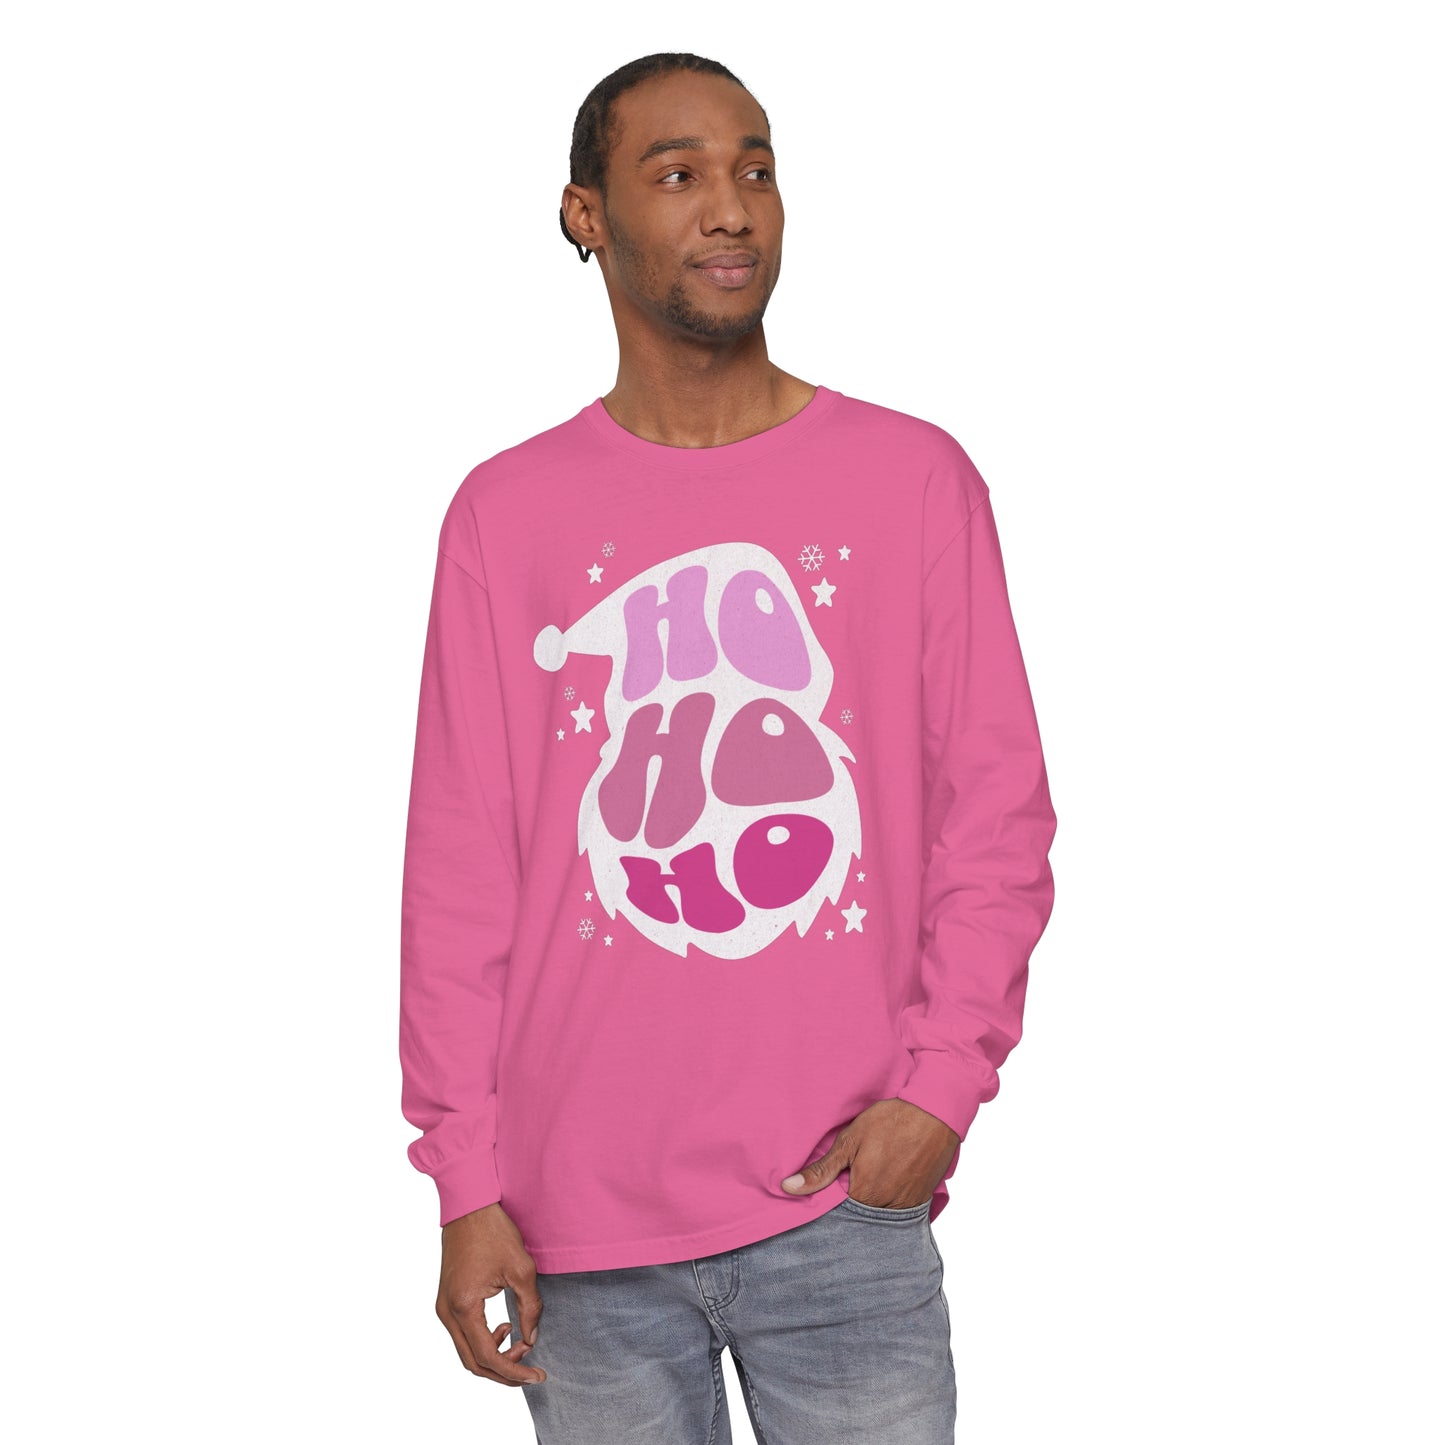 A man wearing a cozy pink long sleeve HO HO HO Santa Outline Pink Long Sleeve Tee - Cozy Comfort Colors Unisex Shirt - Crewneck Holiday tee by Printify, showcasing his holiday style.